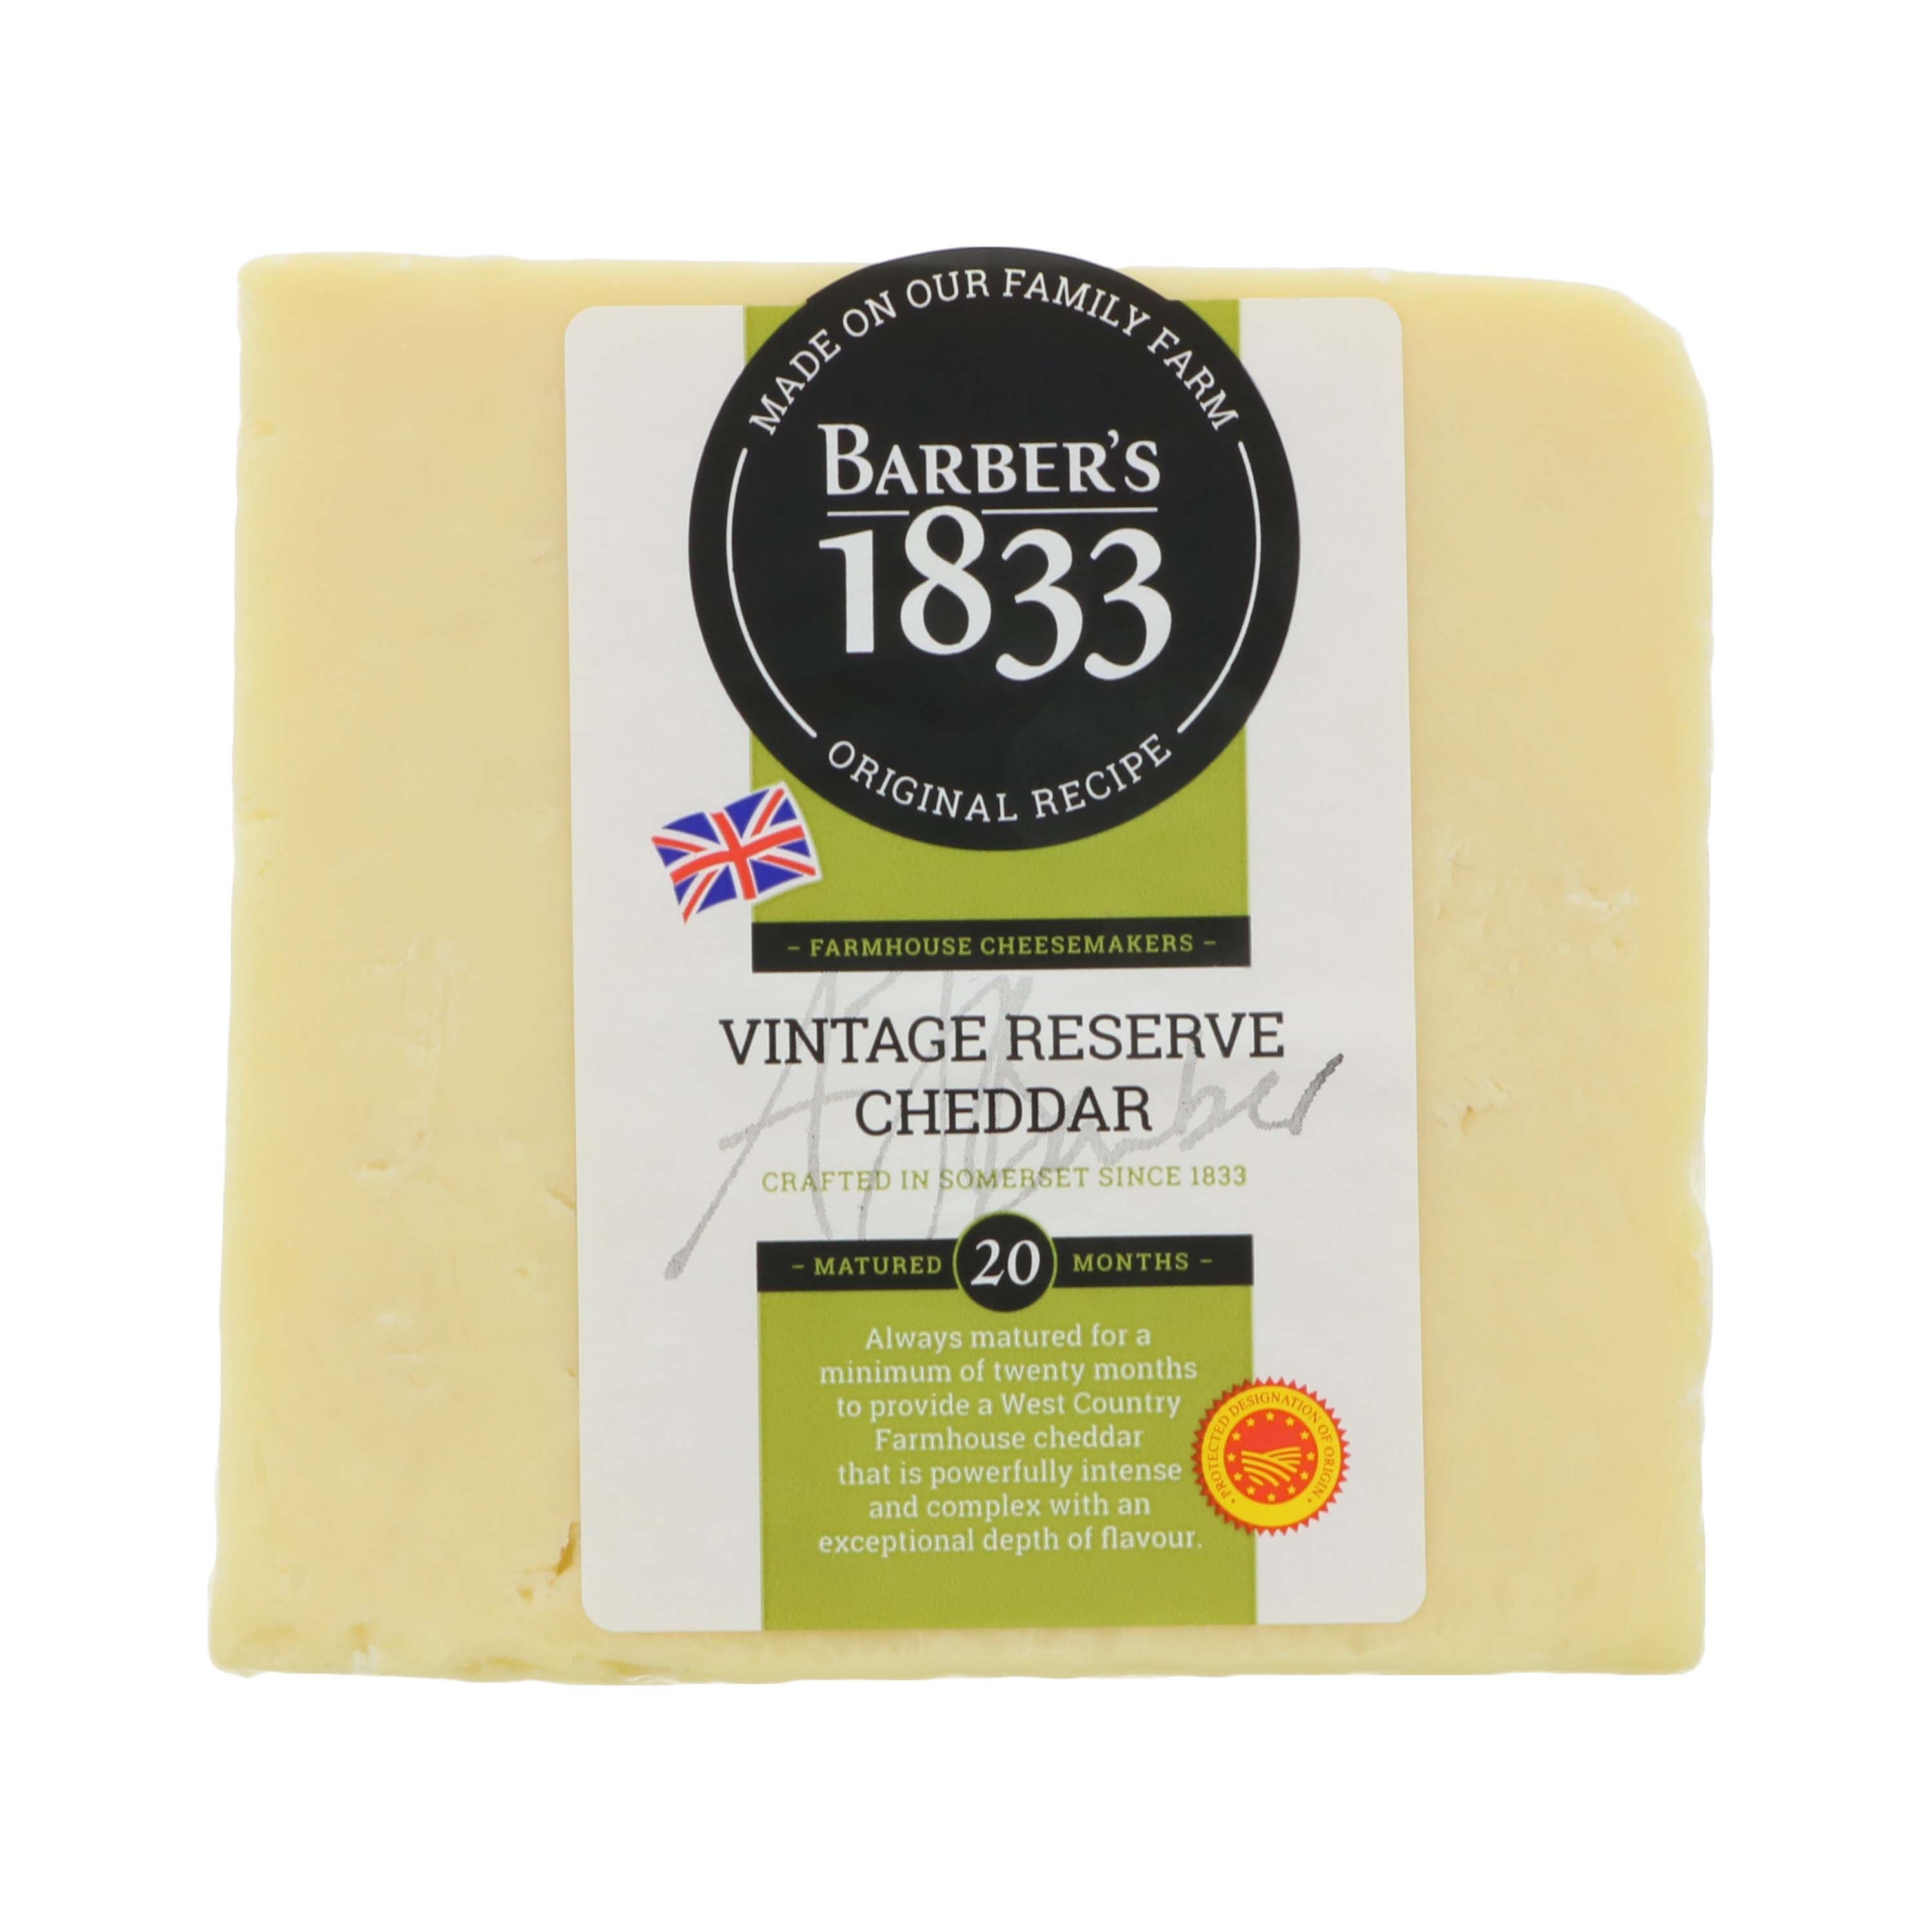 Somerdale Barbers 1833 Vintage Reserve Cheddar Cheese Shop Cheese At